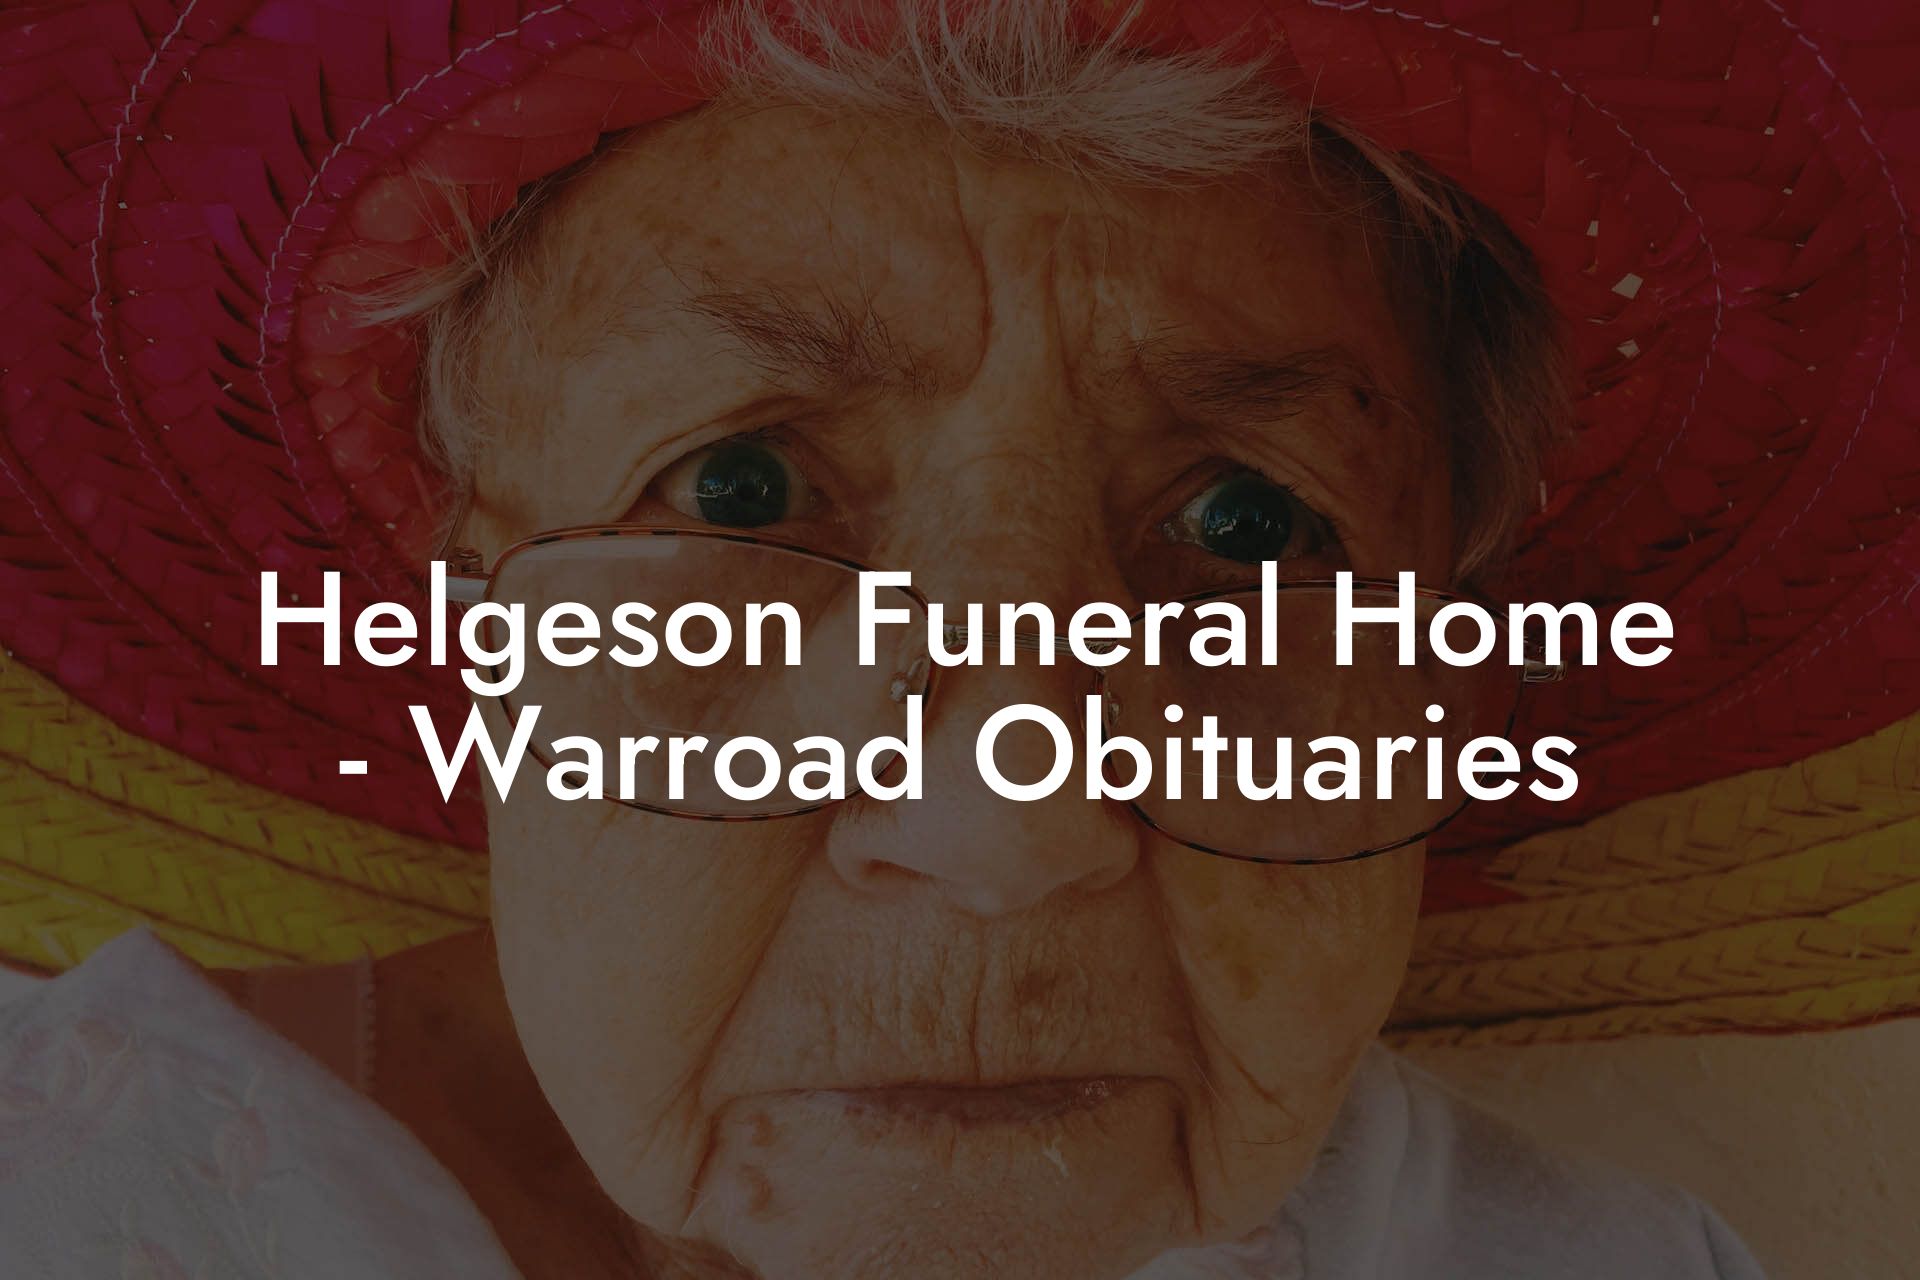 Helgeson Funeral Home - Warroad Obituaries